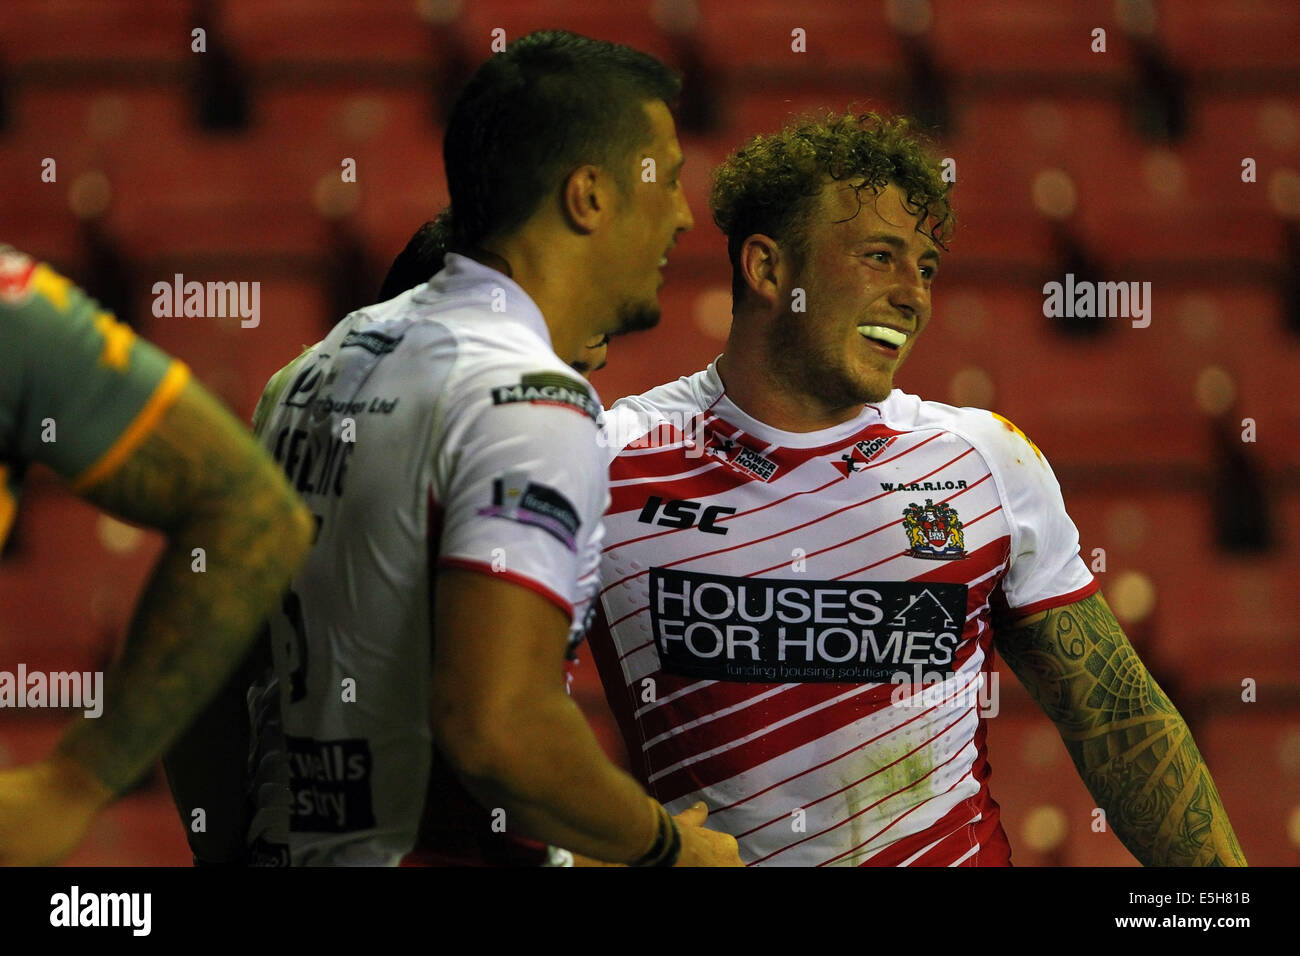 Rugby League - engage Super League - Celtic Crusaders v Wigan Warriors -  The Racecourse Ground. Wigan Warriors' Josh Charnley sores a try Stock  Photo - Alamy